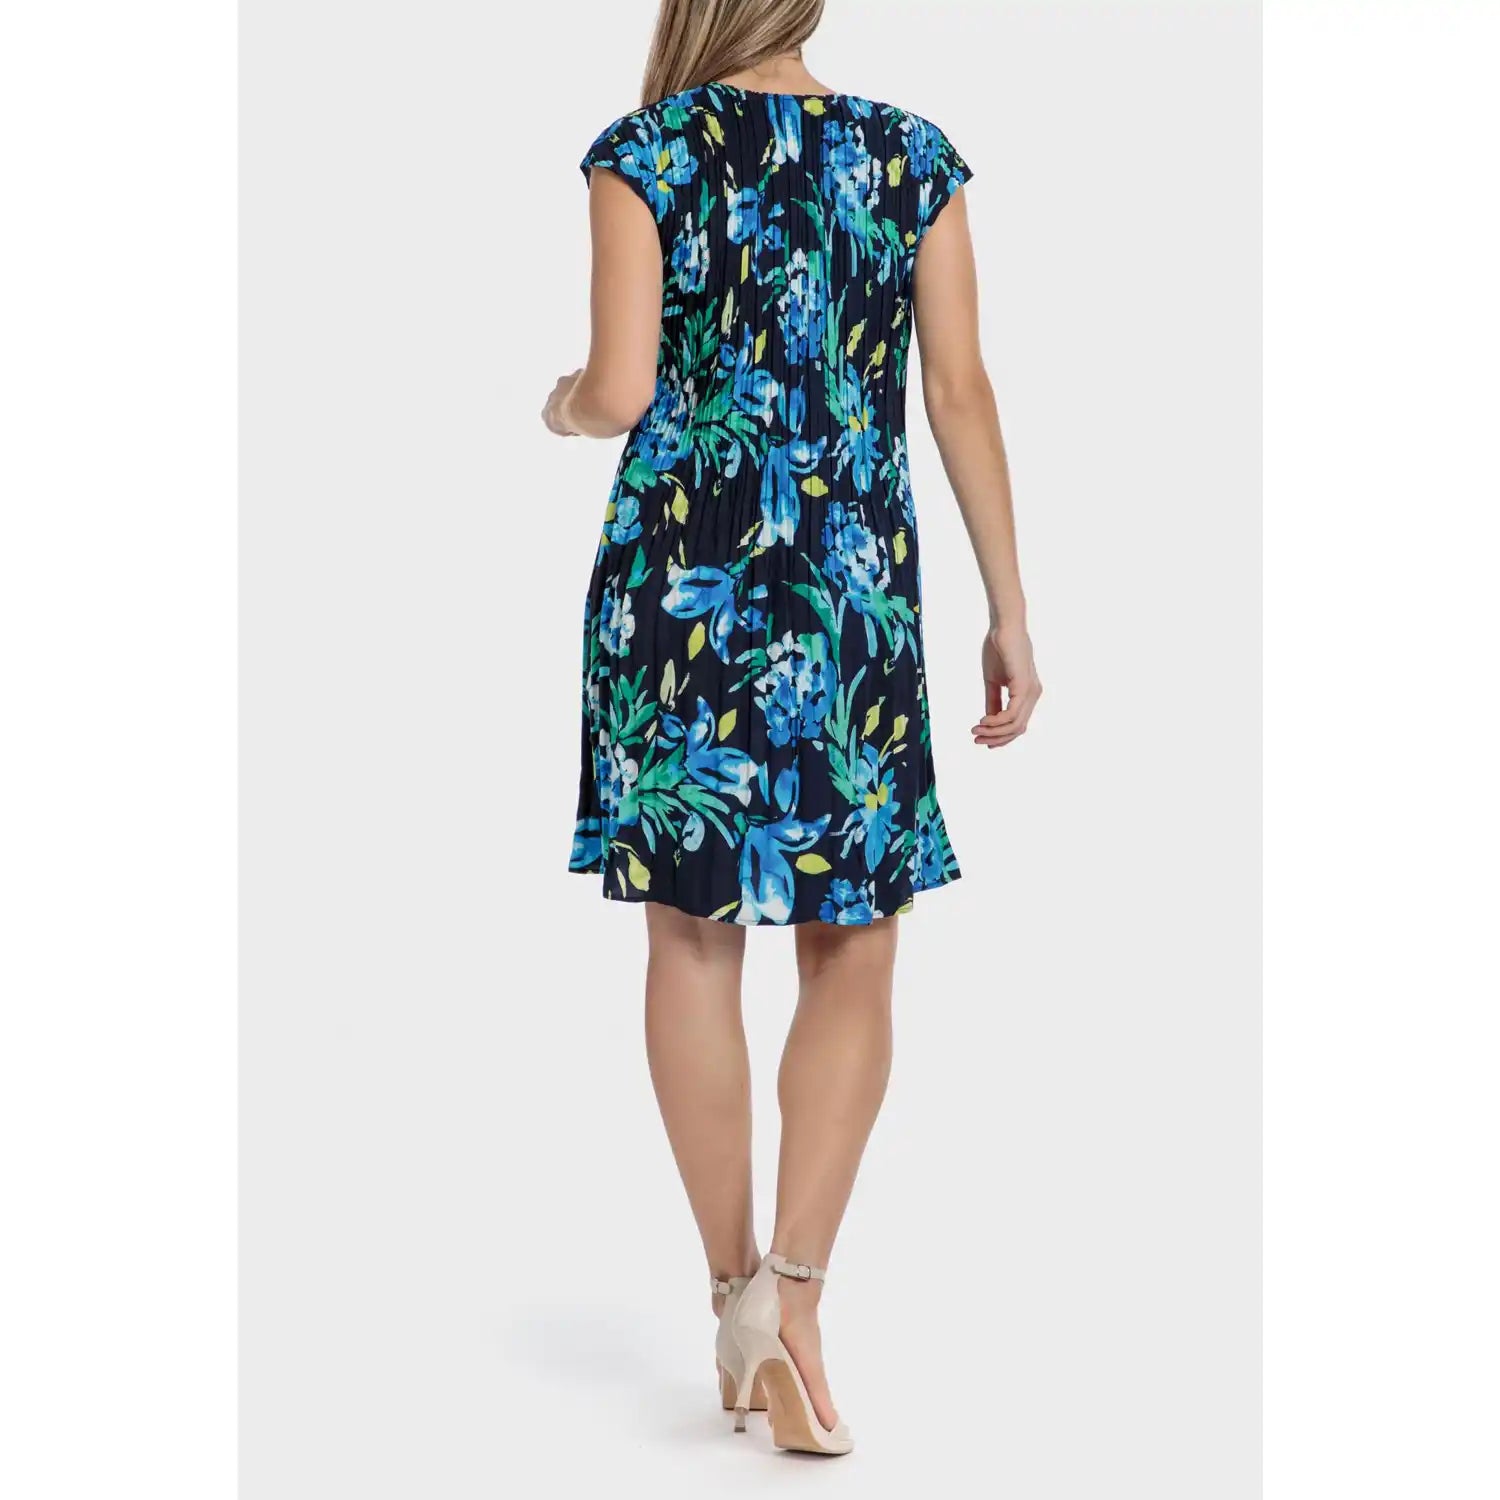 Punt Roma Pleated Printed Dress - Blue / Navy 3 Shaws Department Stores